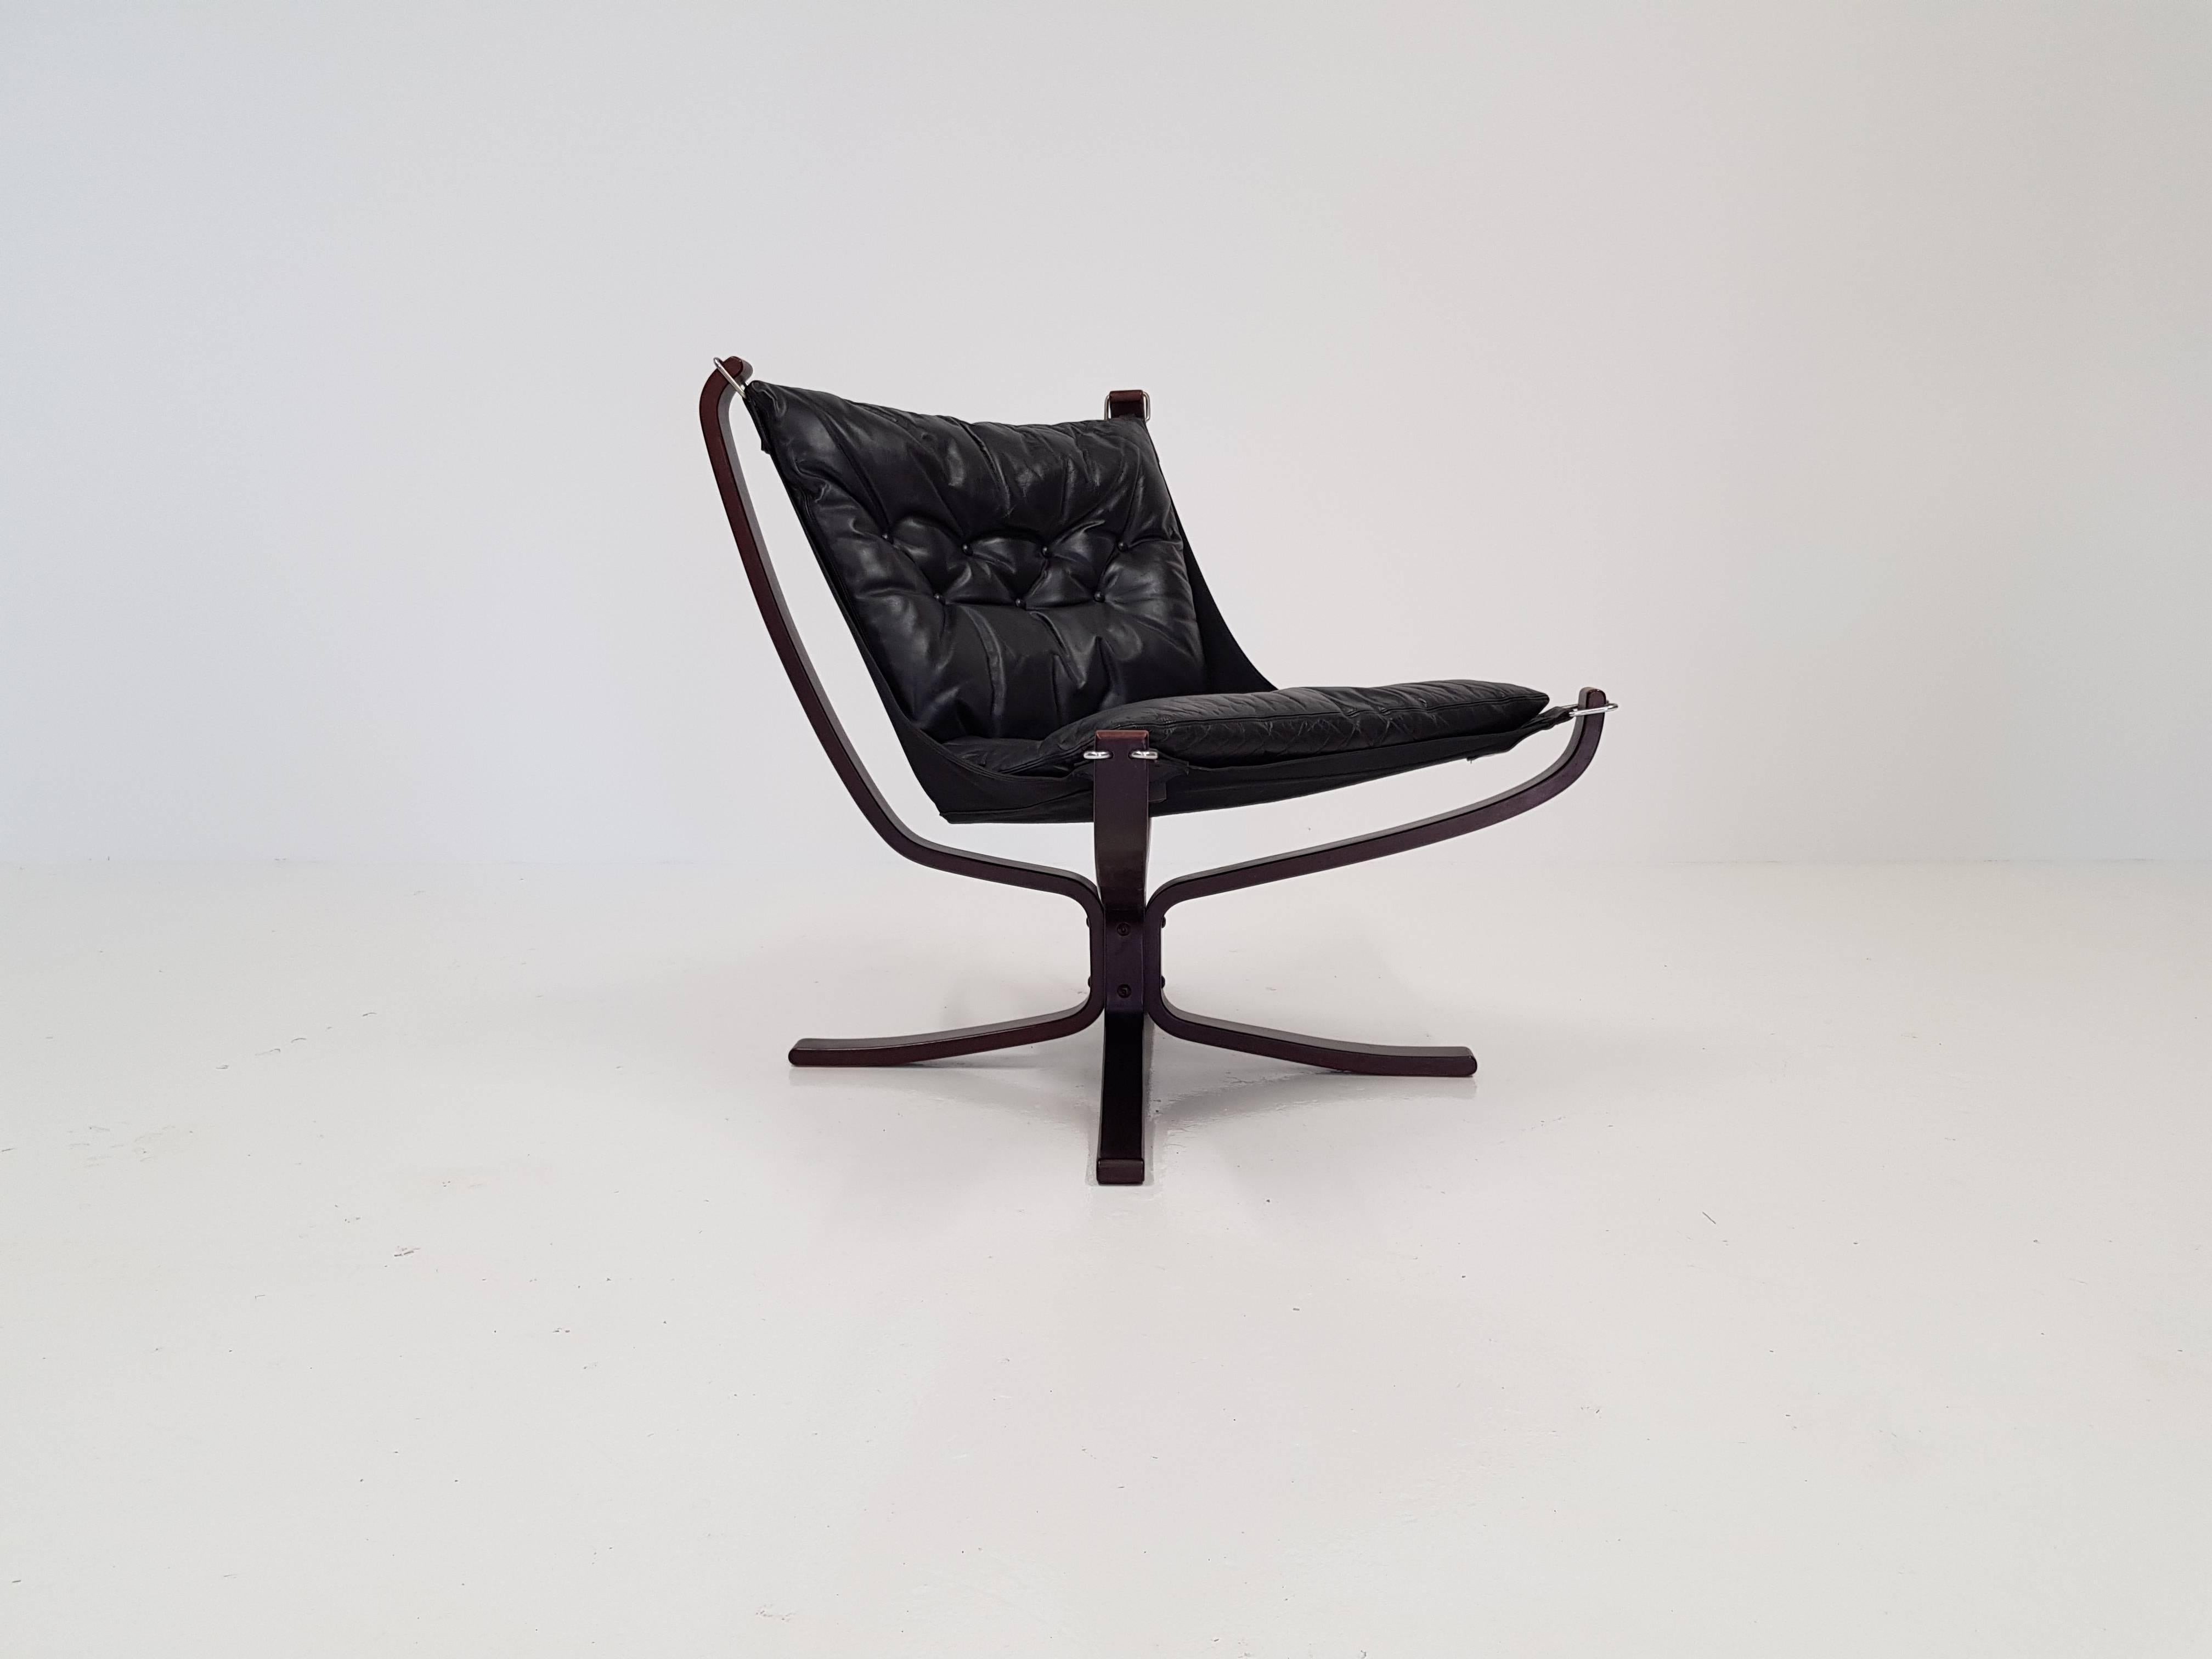 Vintage low-backed X-framed Sigurd Ressell designed Falcon chair, 1970s.

A super comfortable, amazing looking 1970s Sigurd Resell designed iconic Falcon chair. X framed with hammock design. Produced by Vatne Mobler, Norway.


